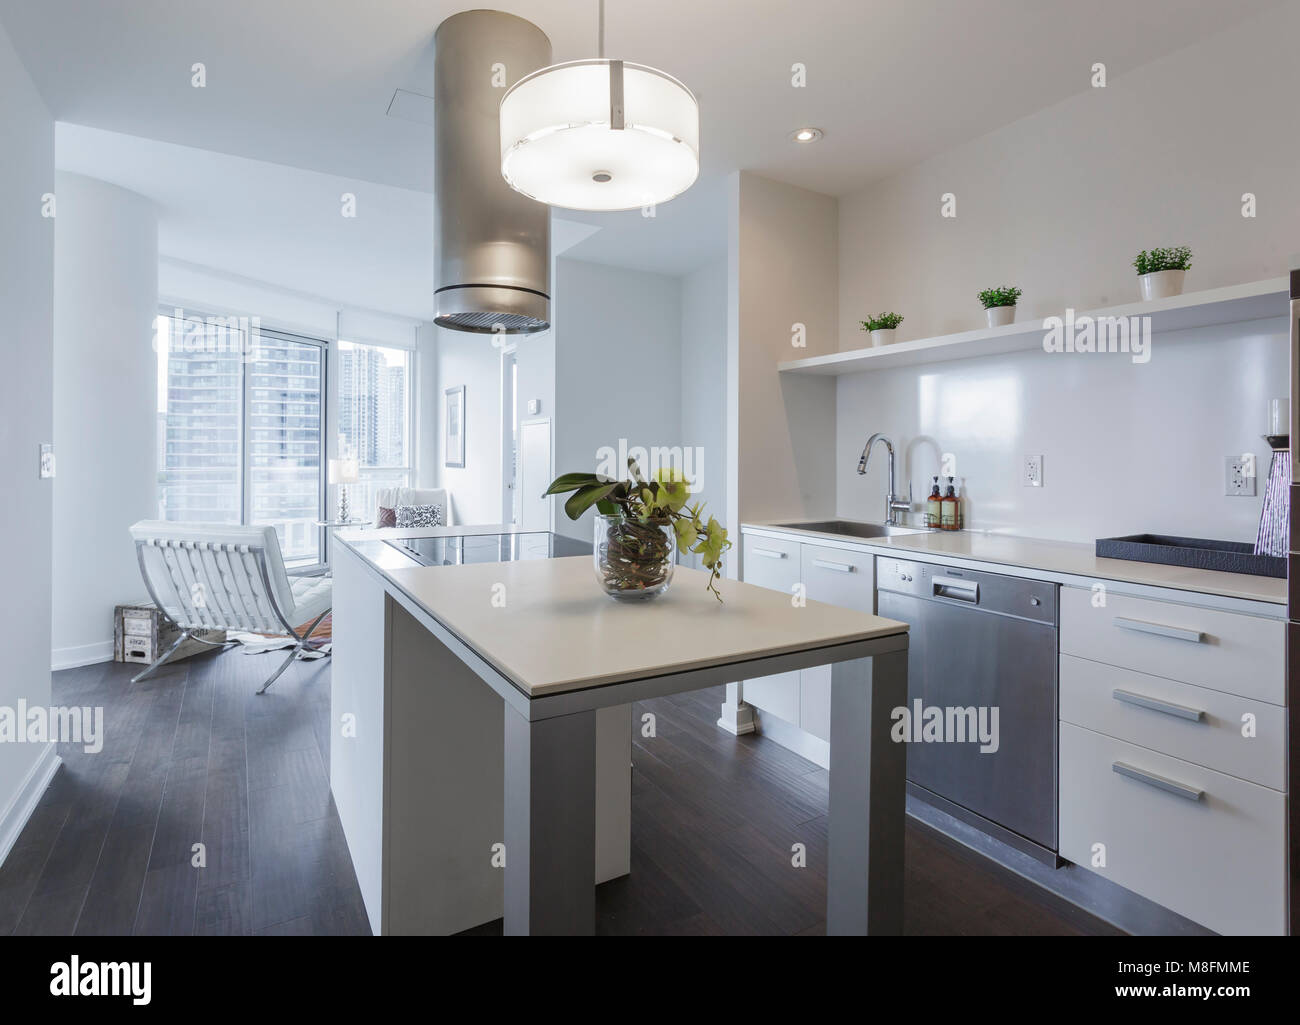 Interior of modern kitchen in a new house Stock Photo